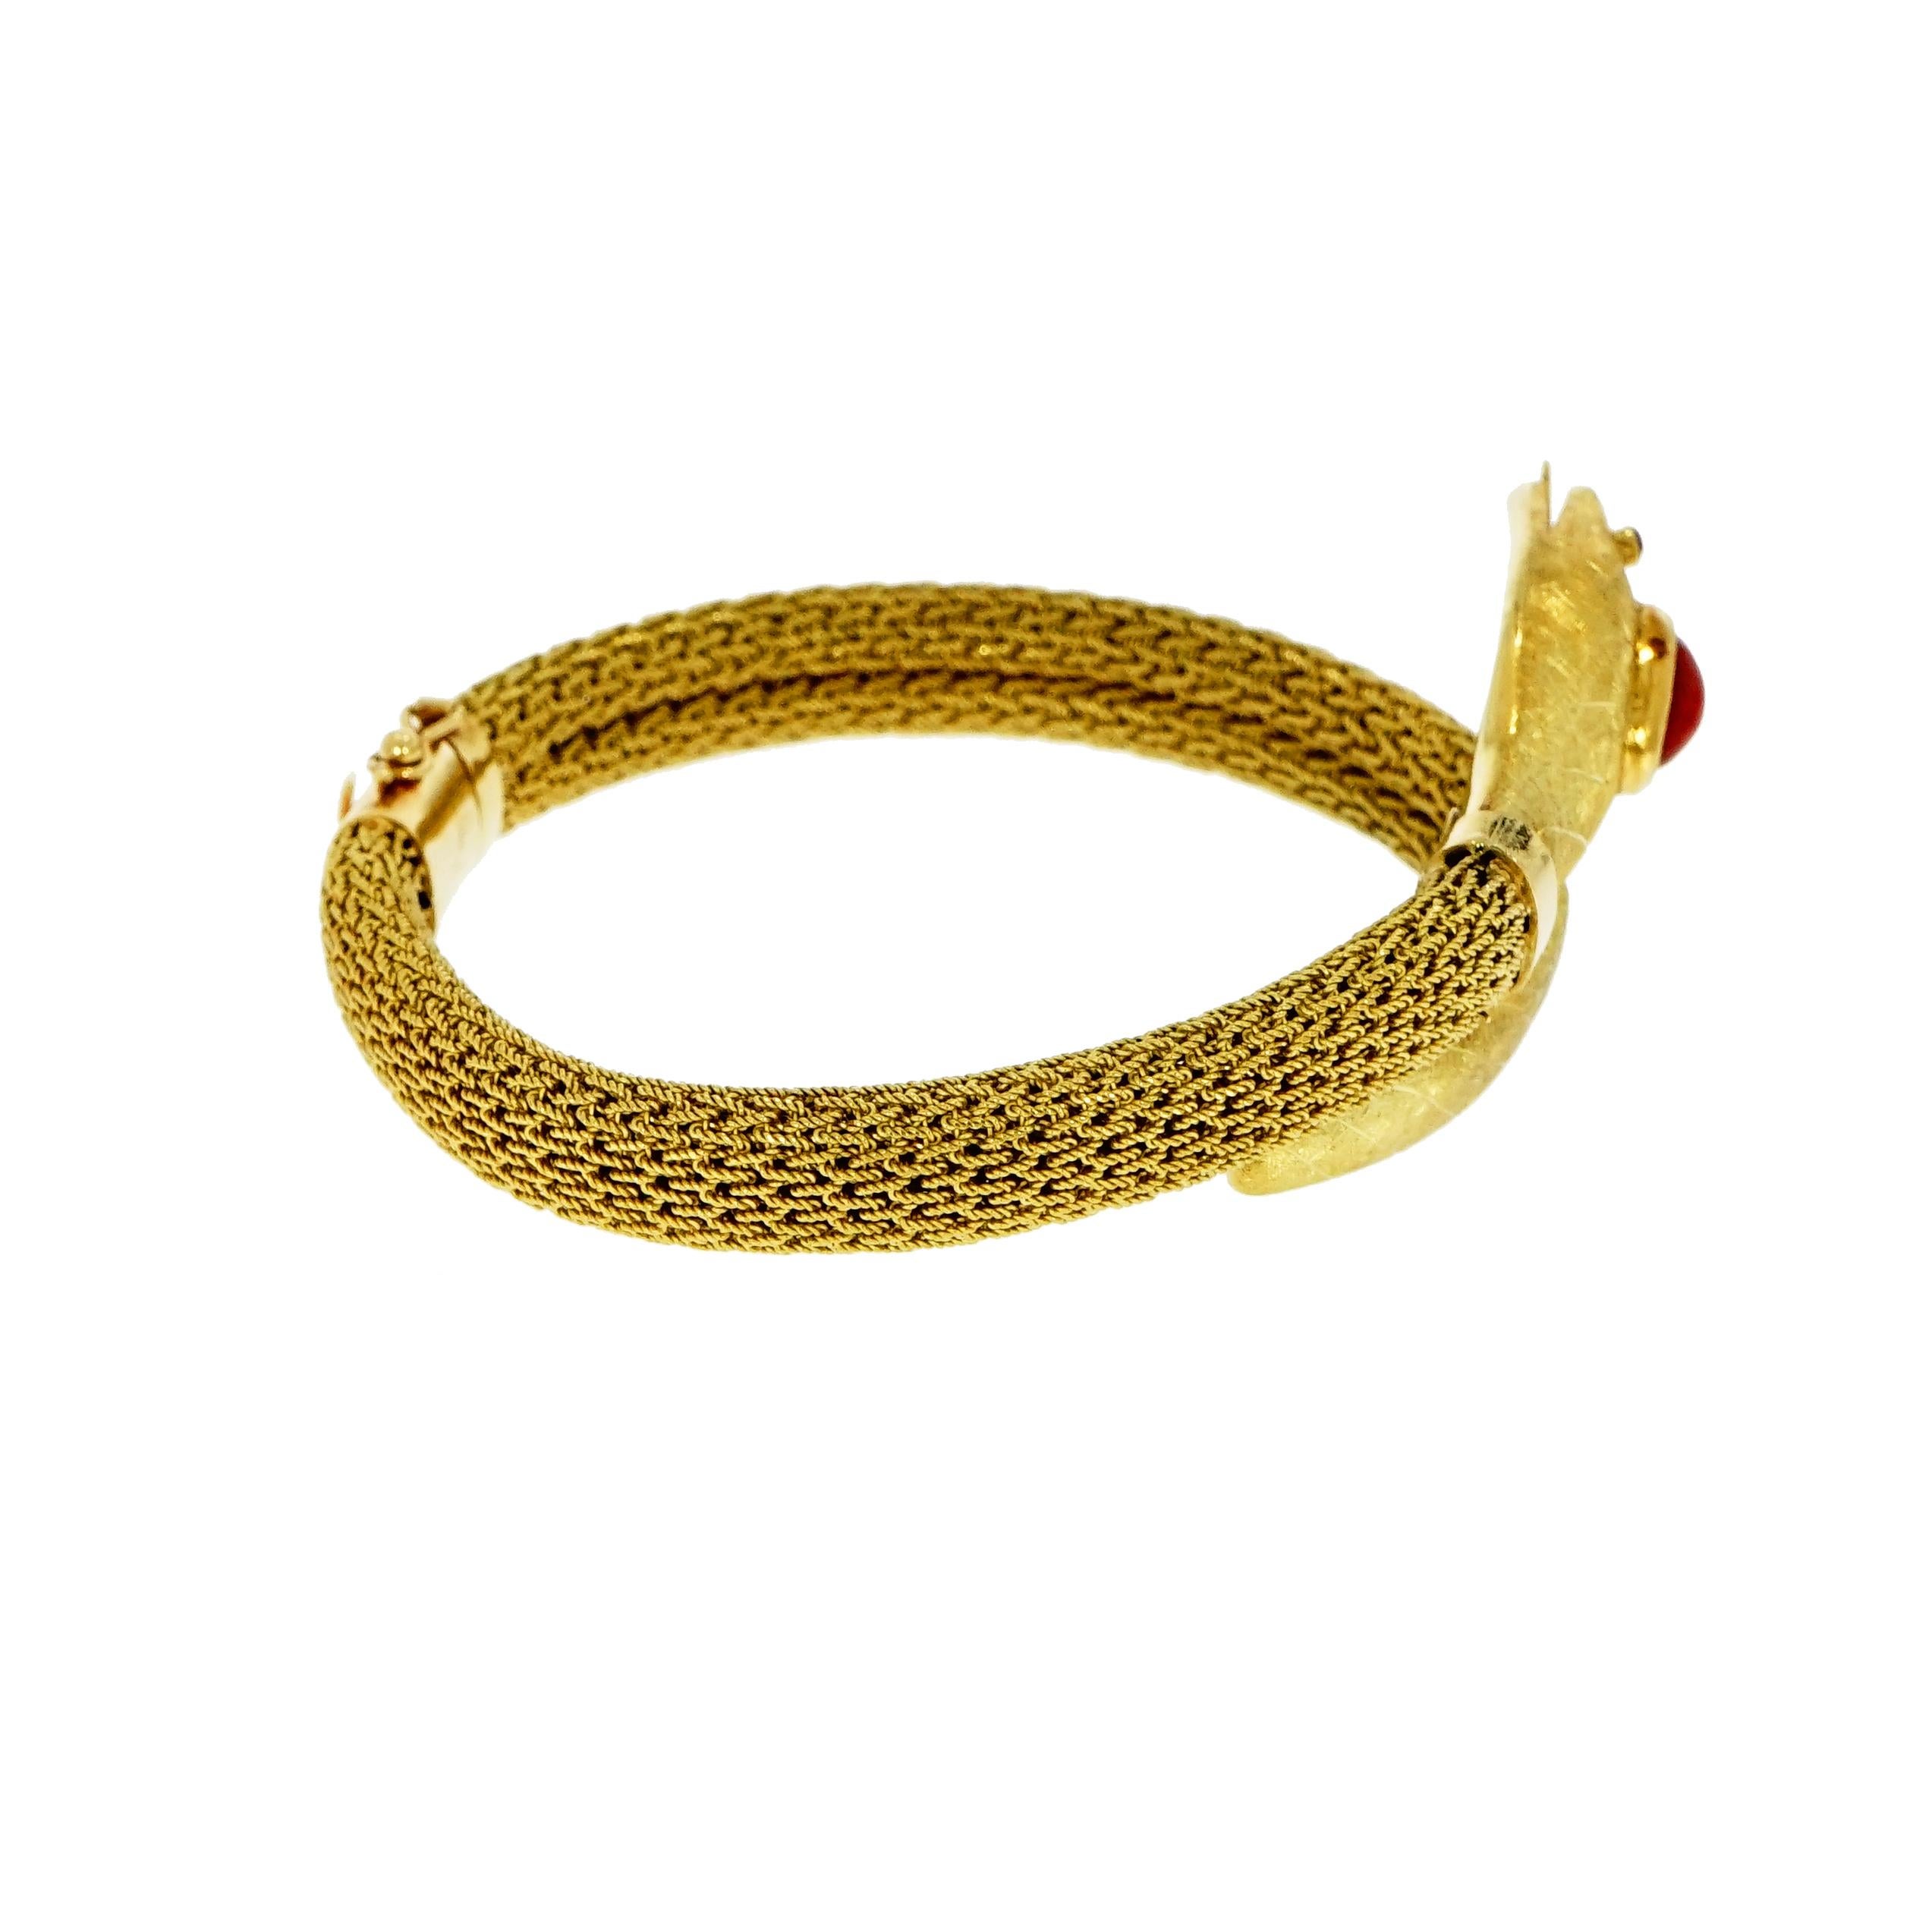 This Vintage Serpenti Bracelet is Crafted in Italy, in 18K yellow gold. 
The head of the snake has a three-dimensional design with ruby eyes, carrying an oval cabochon Mediterranean Coral as crown, a parted tongue that peeks out from its mouth. 
The